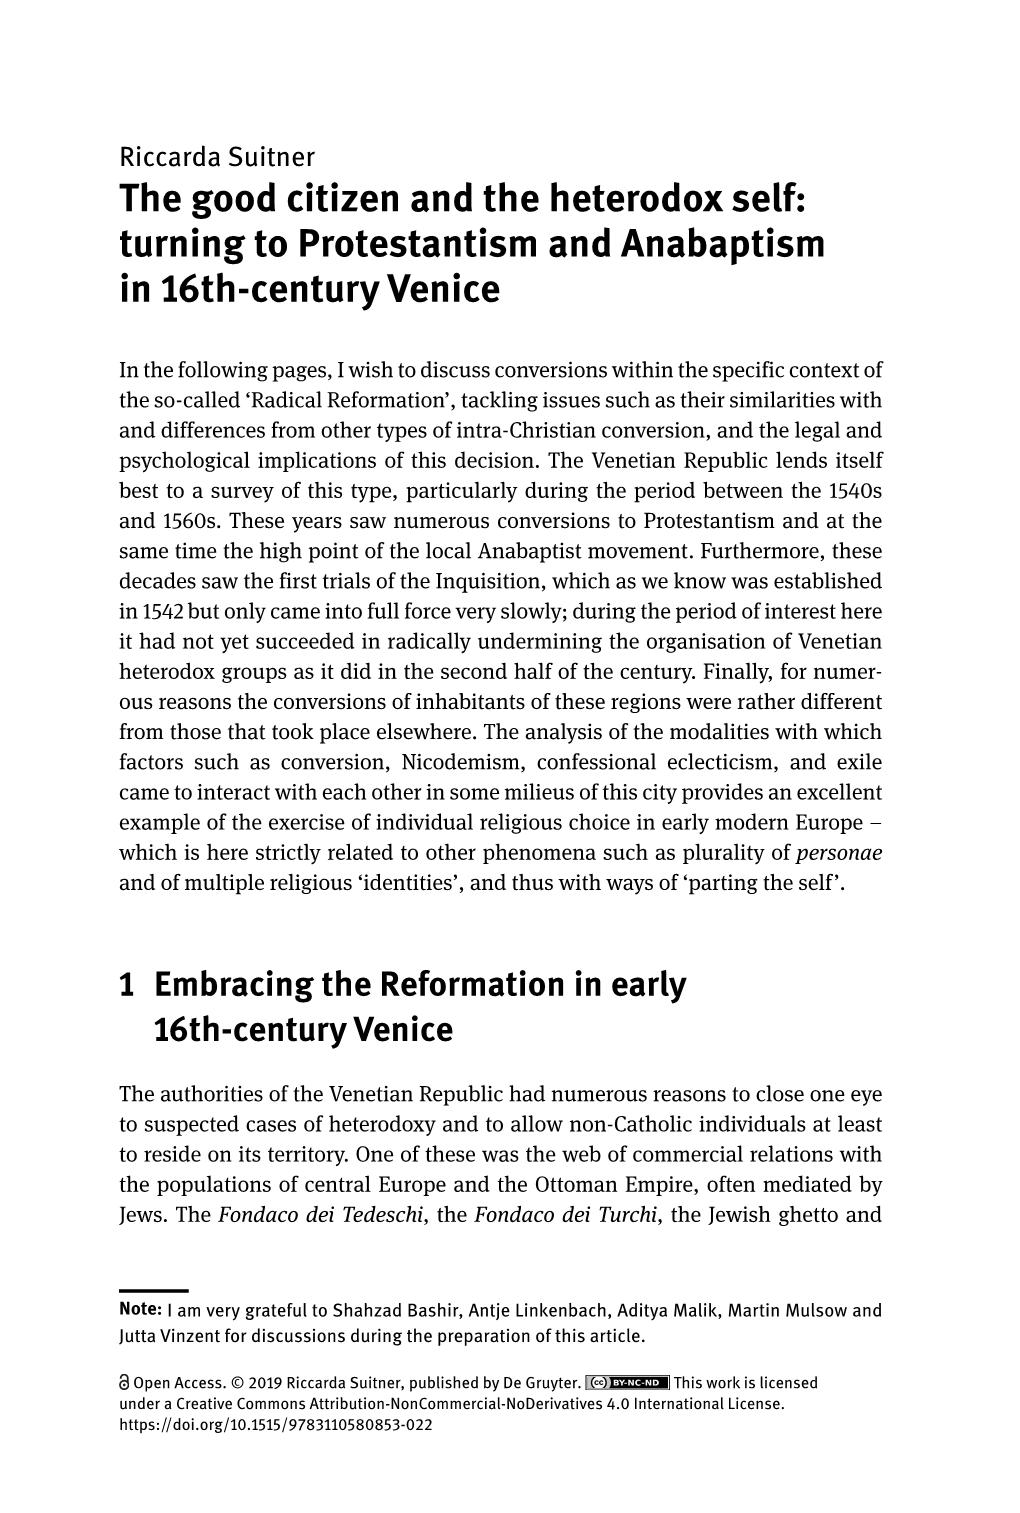 Turning to Protestantism and Anabaptism in 16Th-Century Venice